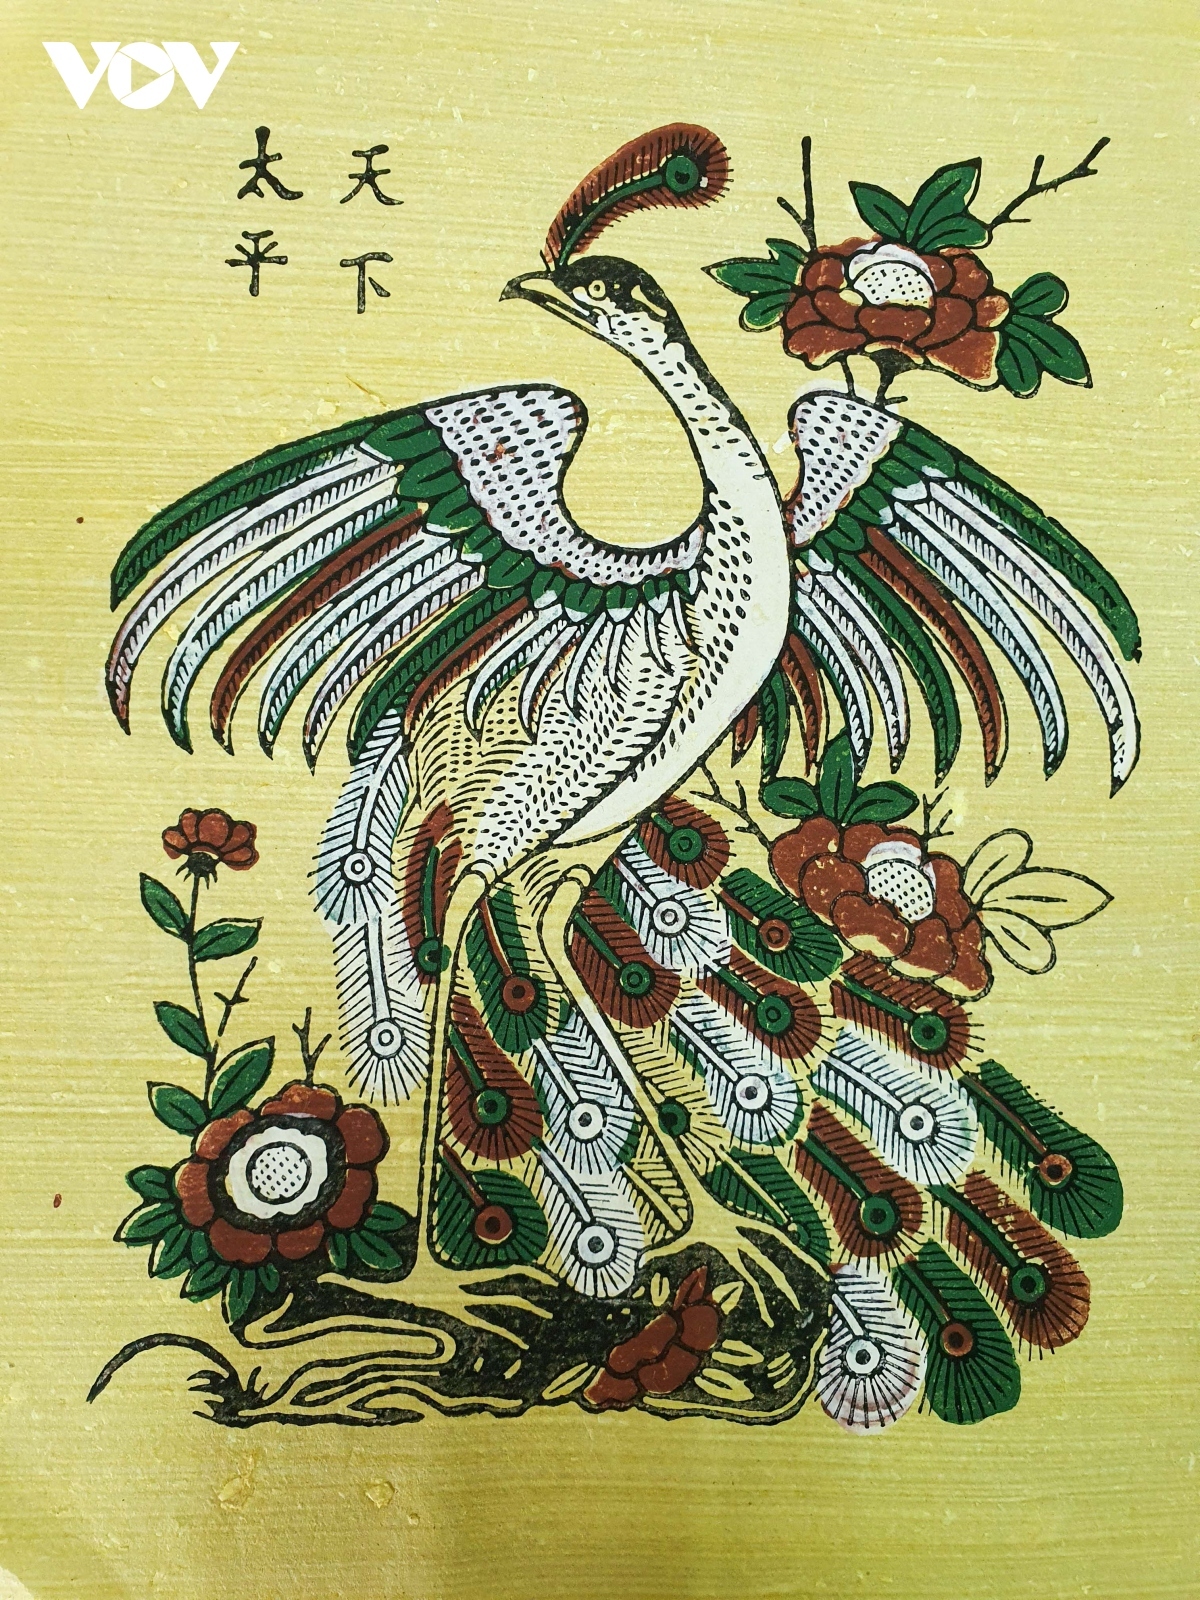 favourite folk woodcut paintings during the tet holiday in vietnam picture 9